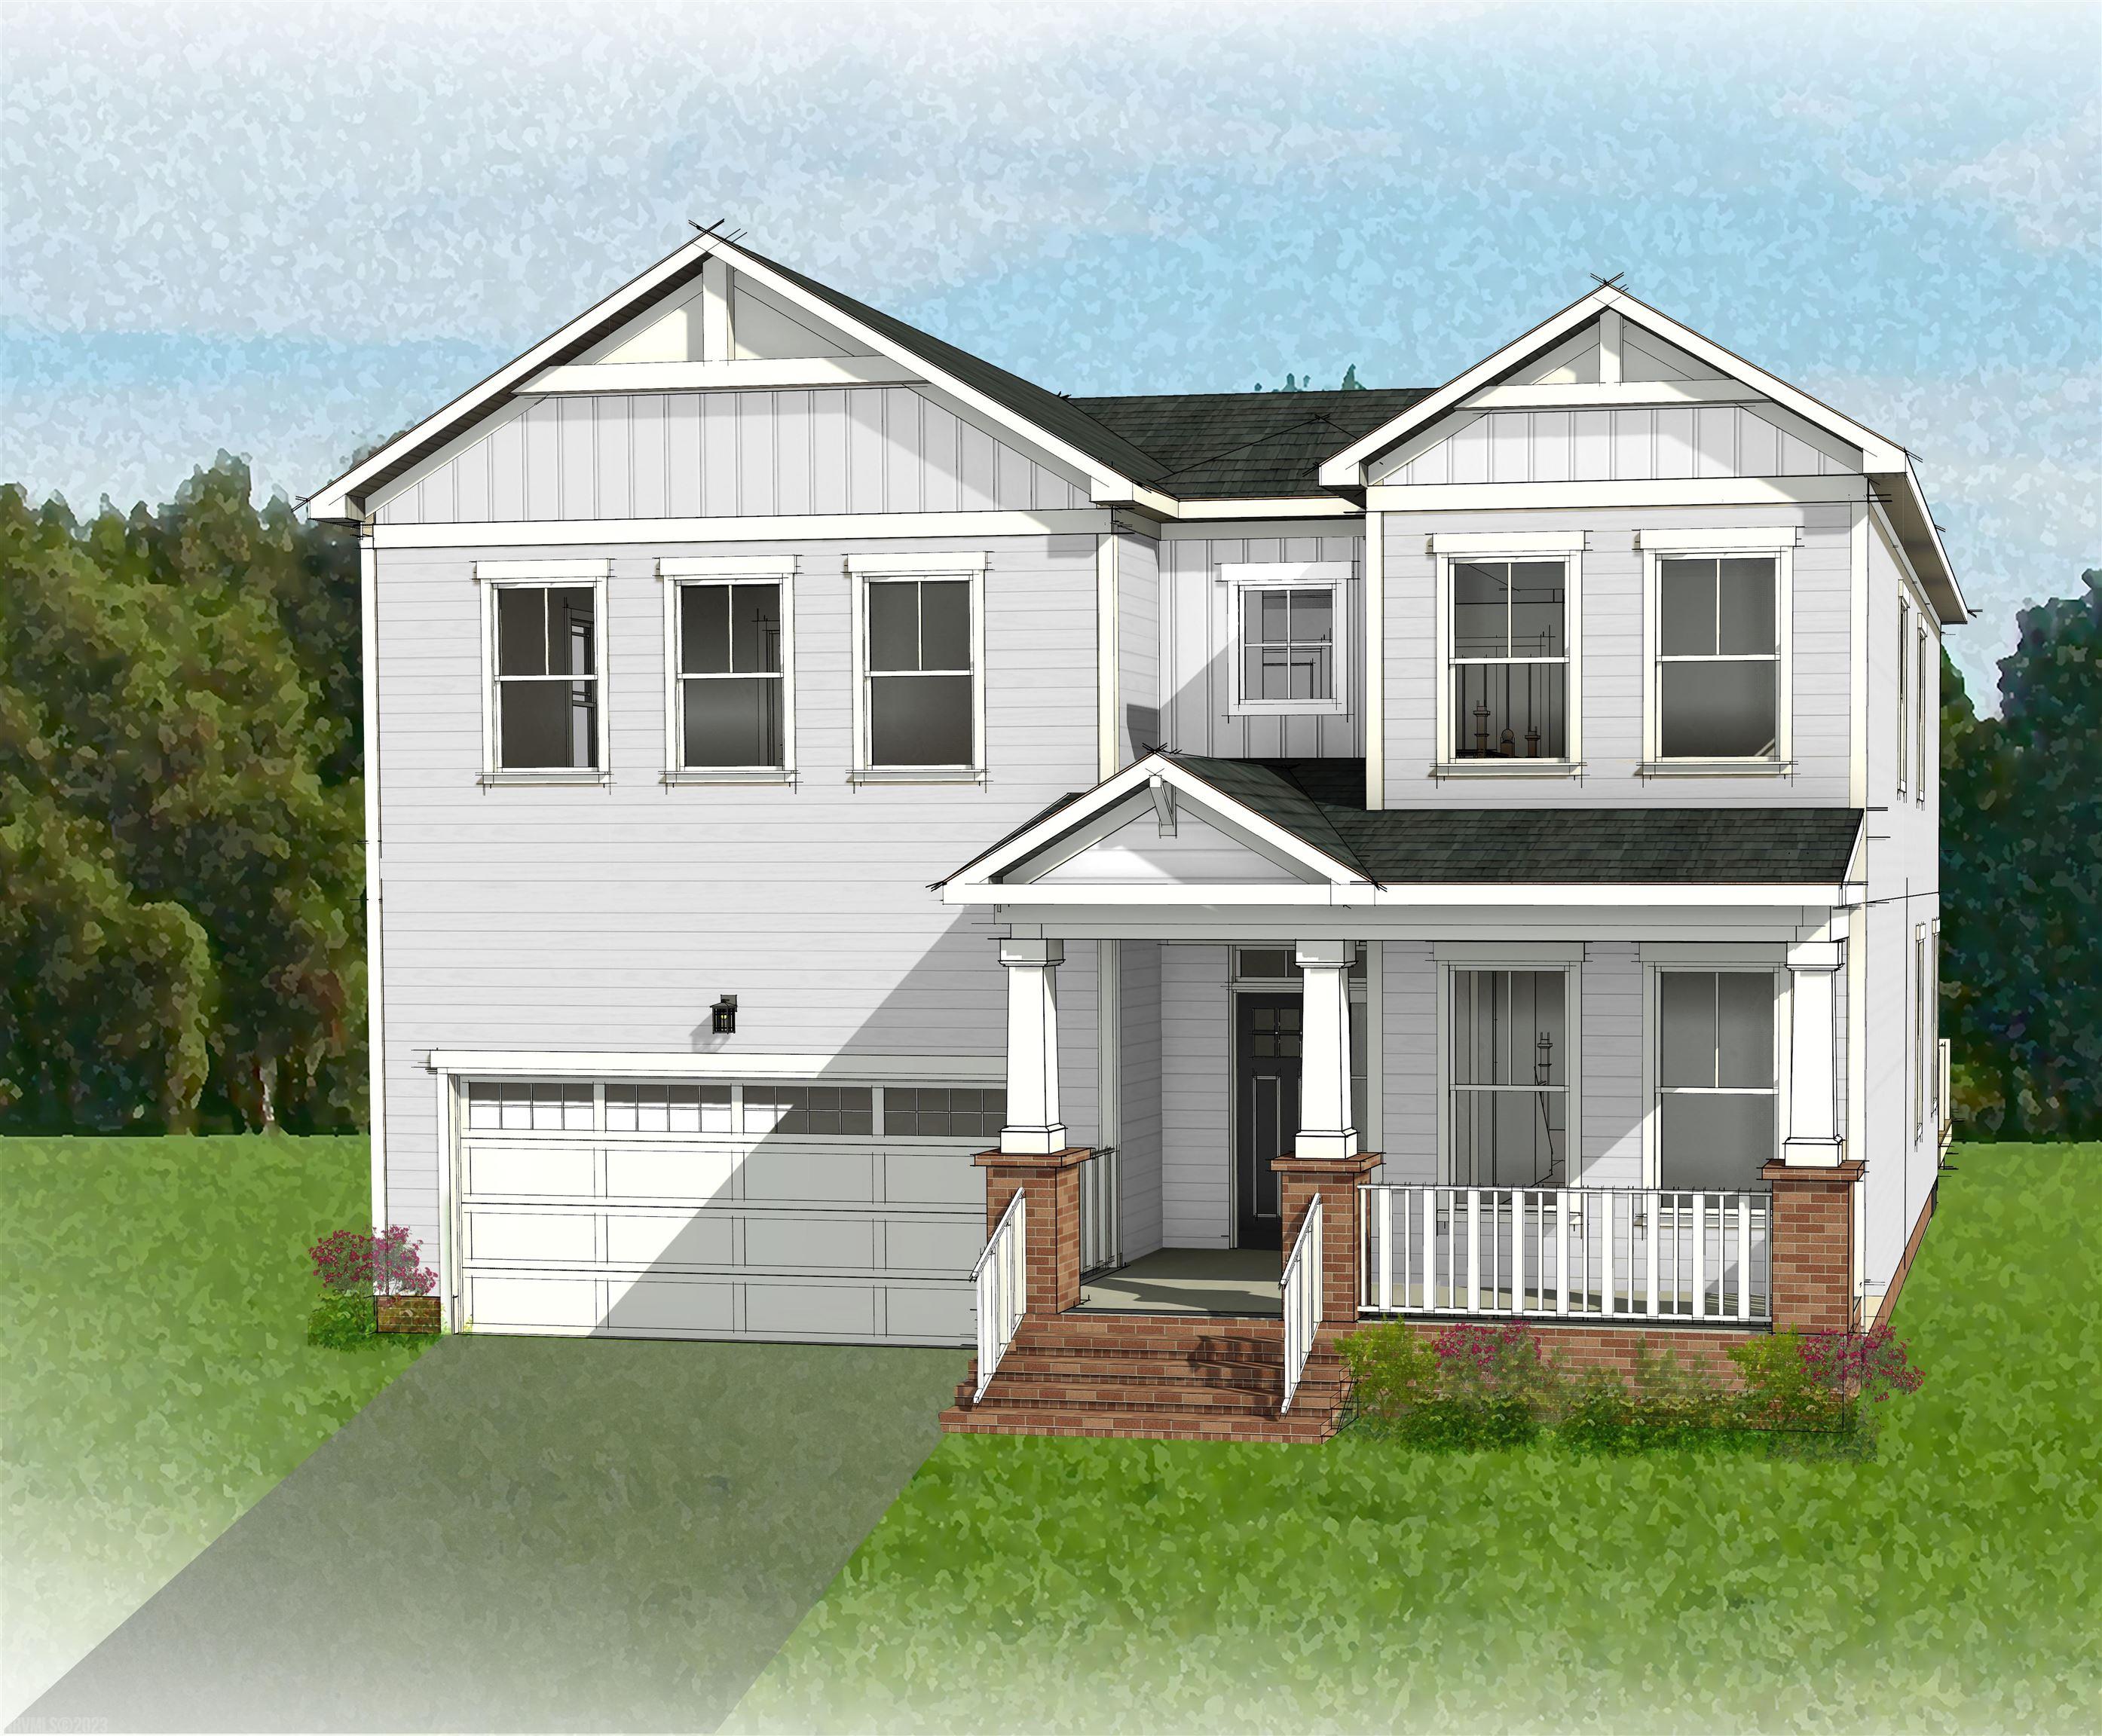 Now under construction for Spring 2023 delivery in Christiansburg's NEWEST community, THE MEADOWS! ! The Craftsman Westfield floorplan boasts over 2700 finished square feet and features 4 bedrooms, 3.5 baths, open-designed kitchen & breakfast nook, den, and spacious walk in closets! This home includes an unfinished basement and rear deck for plenty of outdoor space to enjoy the panoramic views from all angles. Price includes all designer selected luxury upgrade & finishes throughout! All homes are built and tested by a 3rd party for the highest level of energy efficiency and comfort.